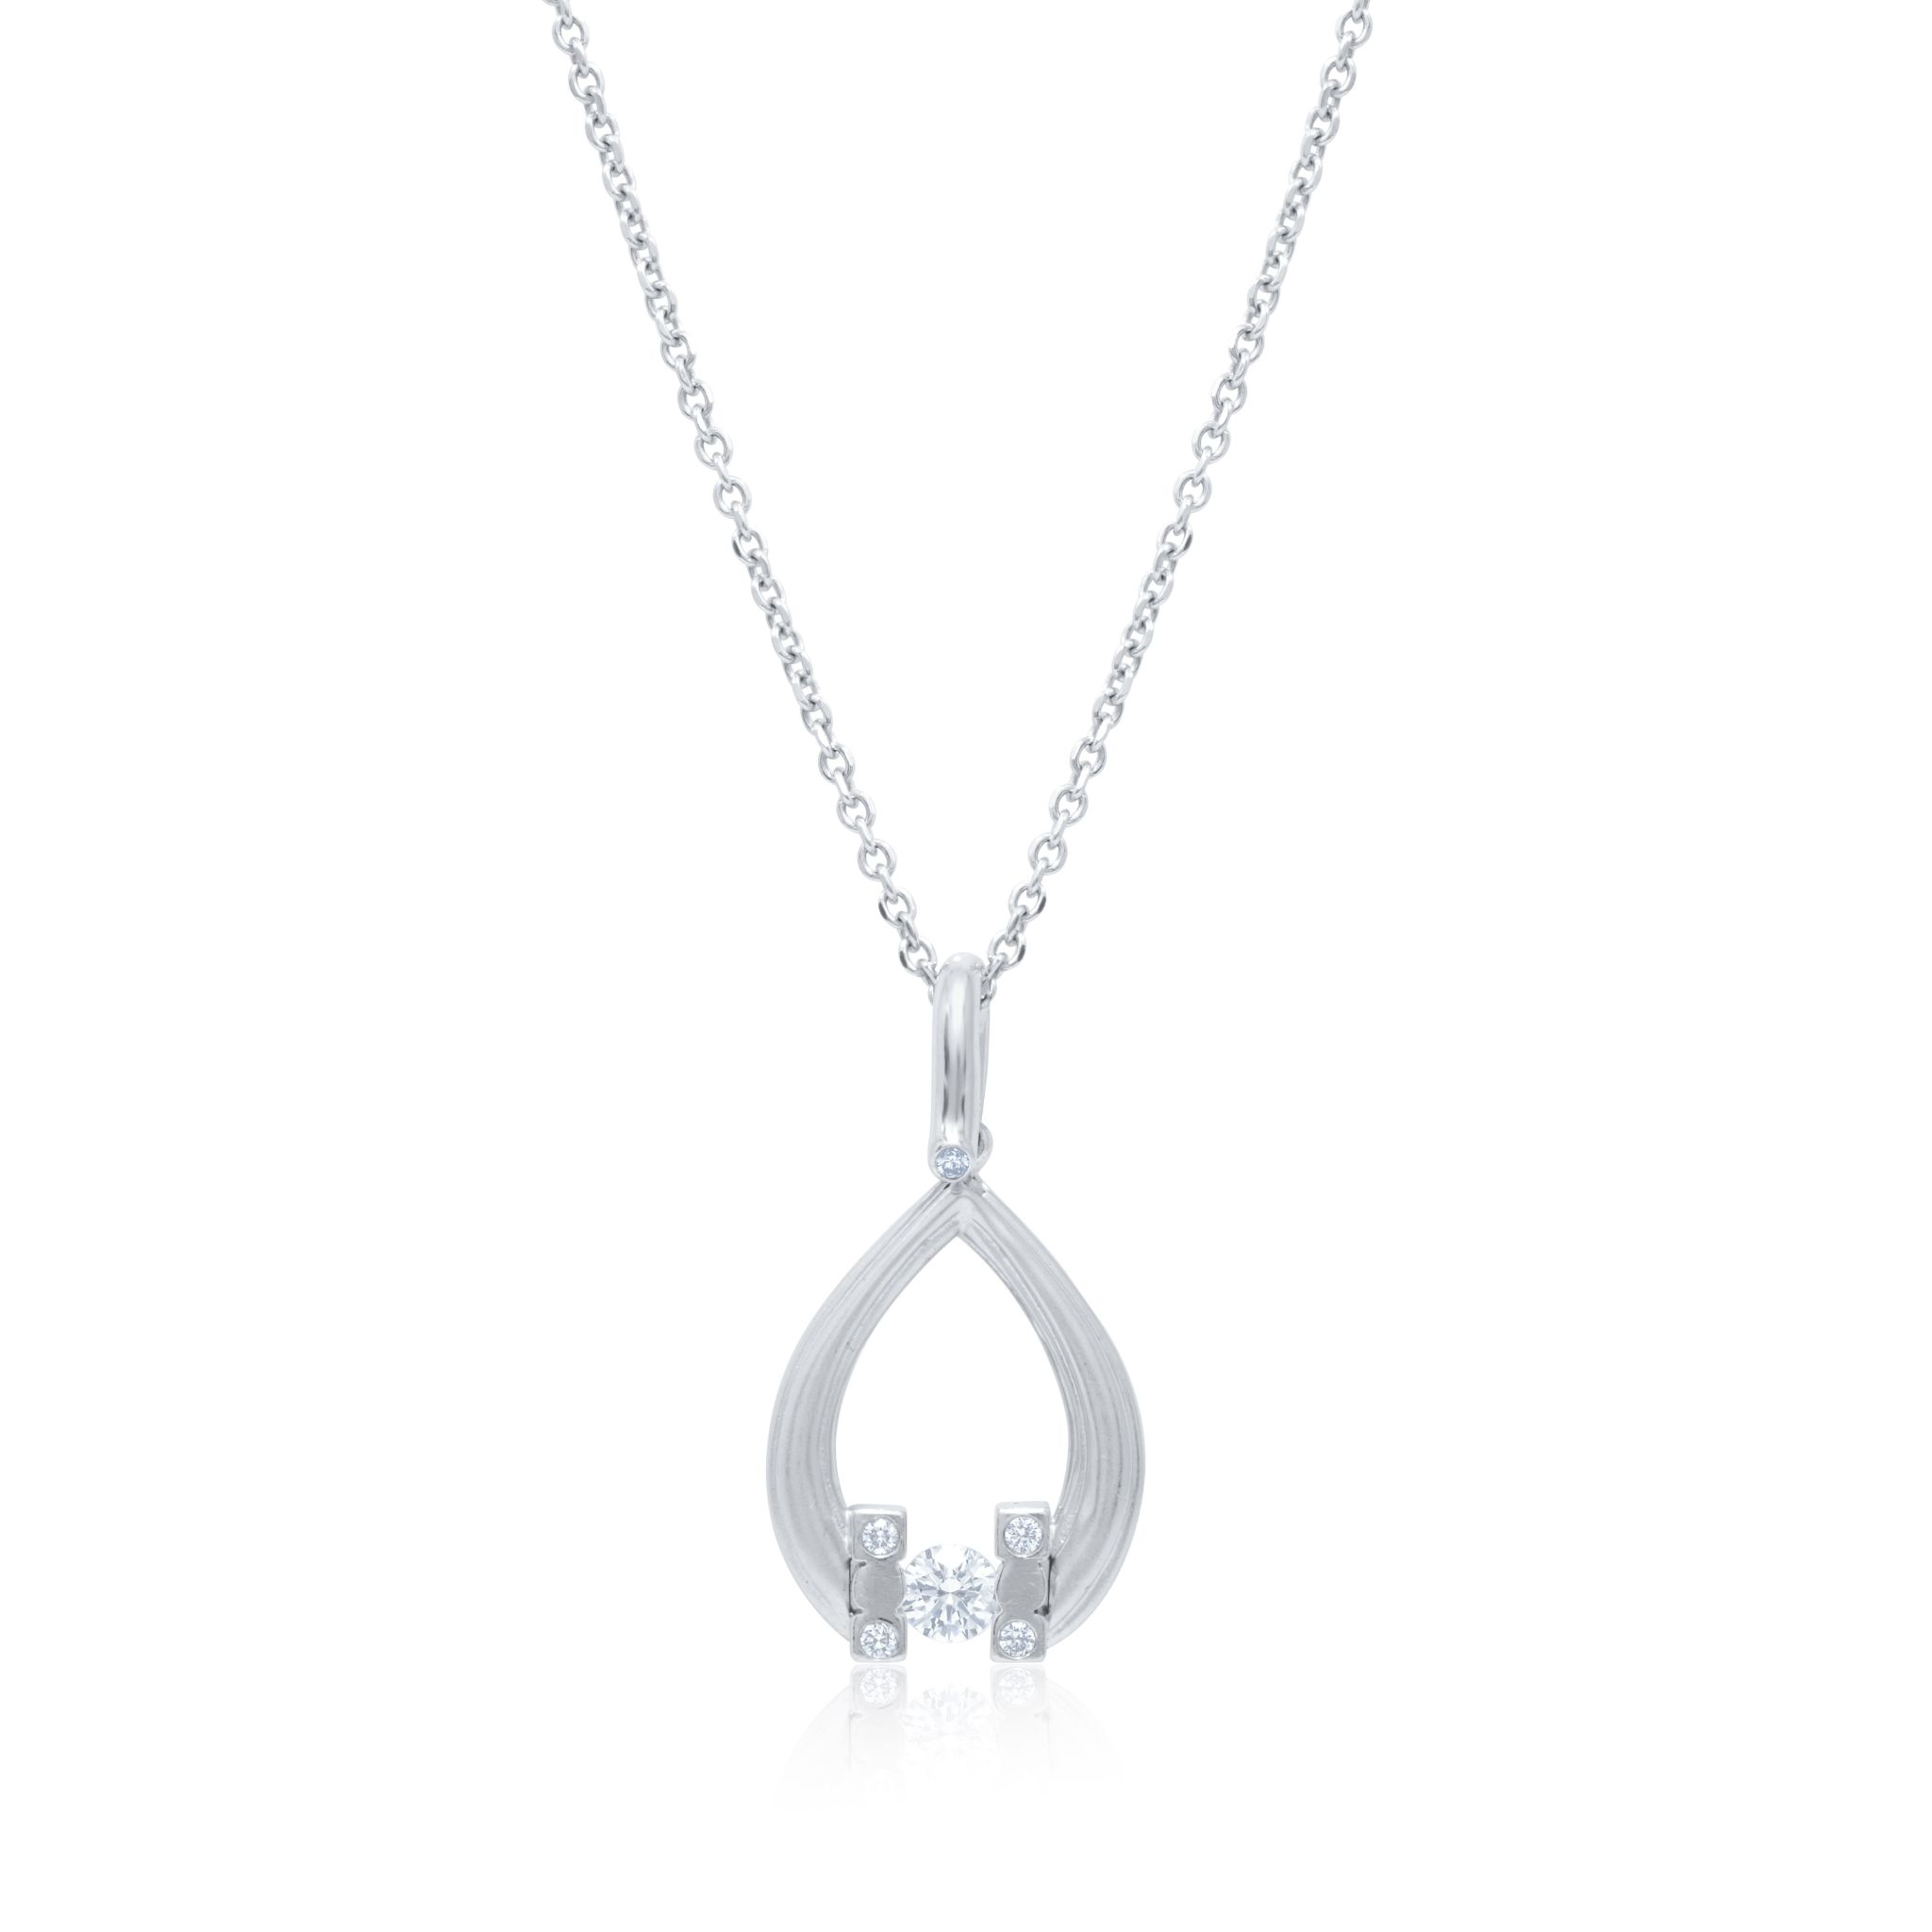 14kt White Gold Teardrop Pendant with 0.63 Cts.jpg